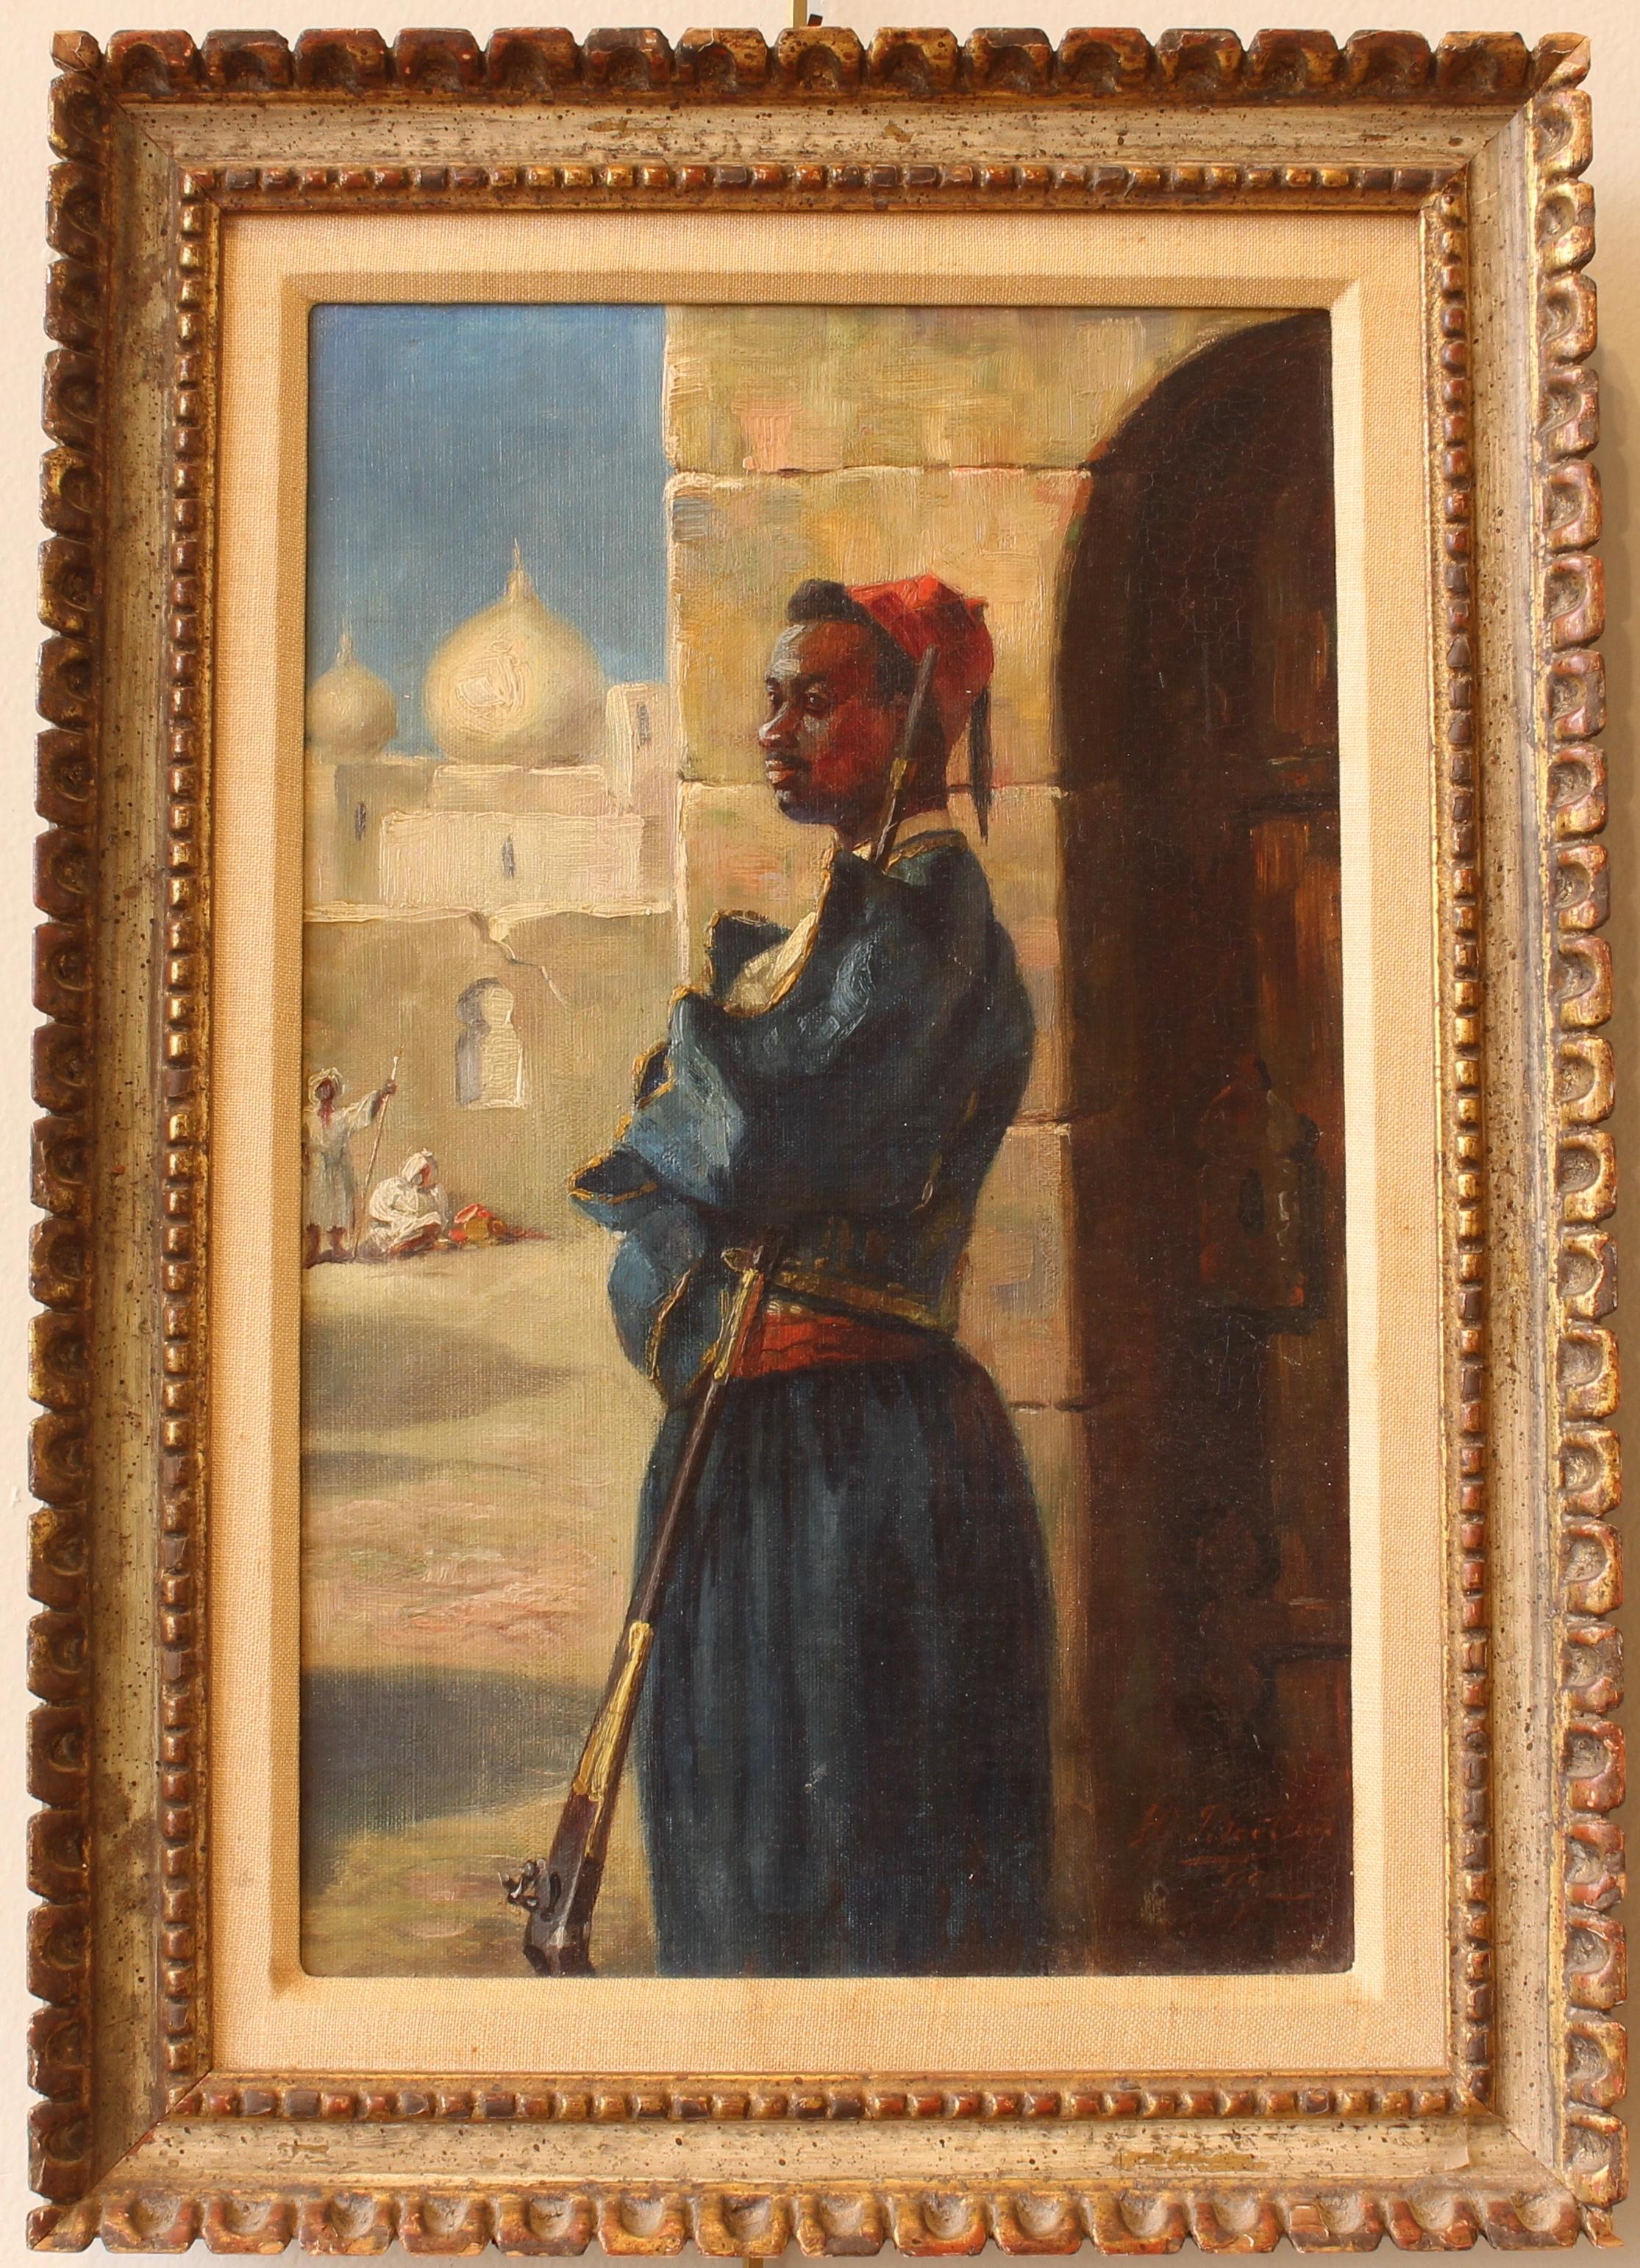 An early 20th century French oil on canvas portrait of a bedouin soldier in carved and painted wood frame signed and dated lower right.